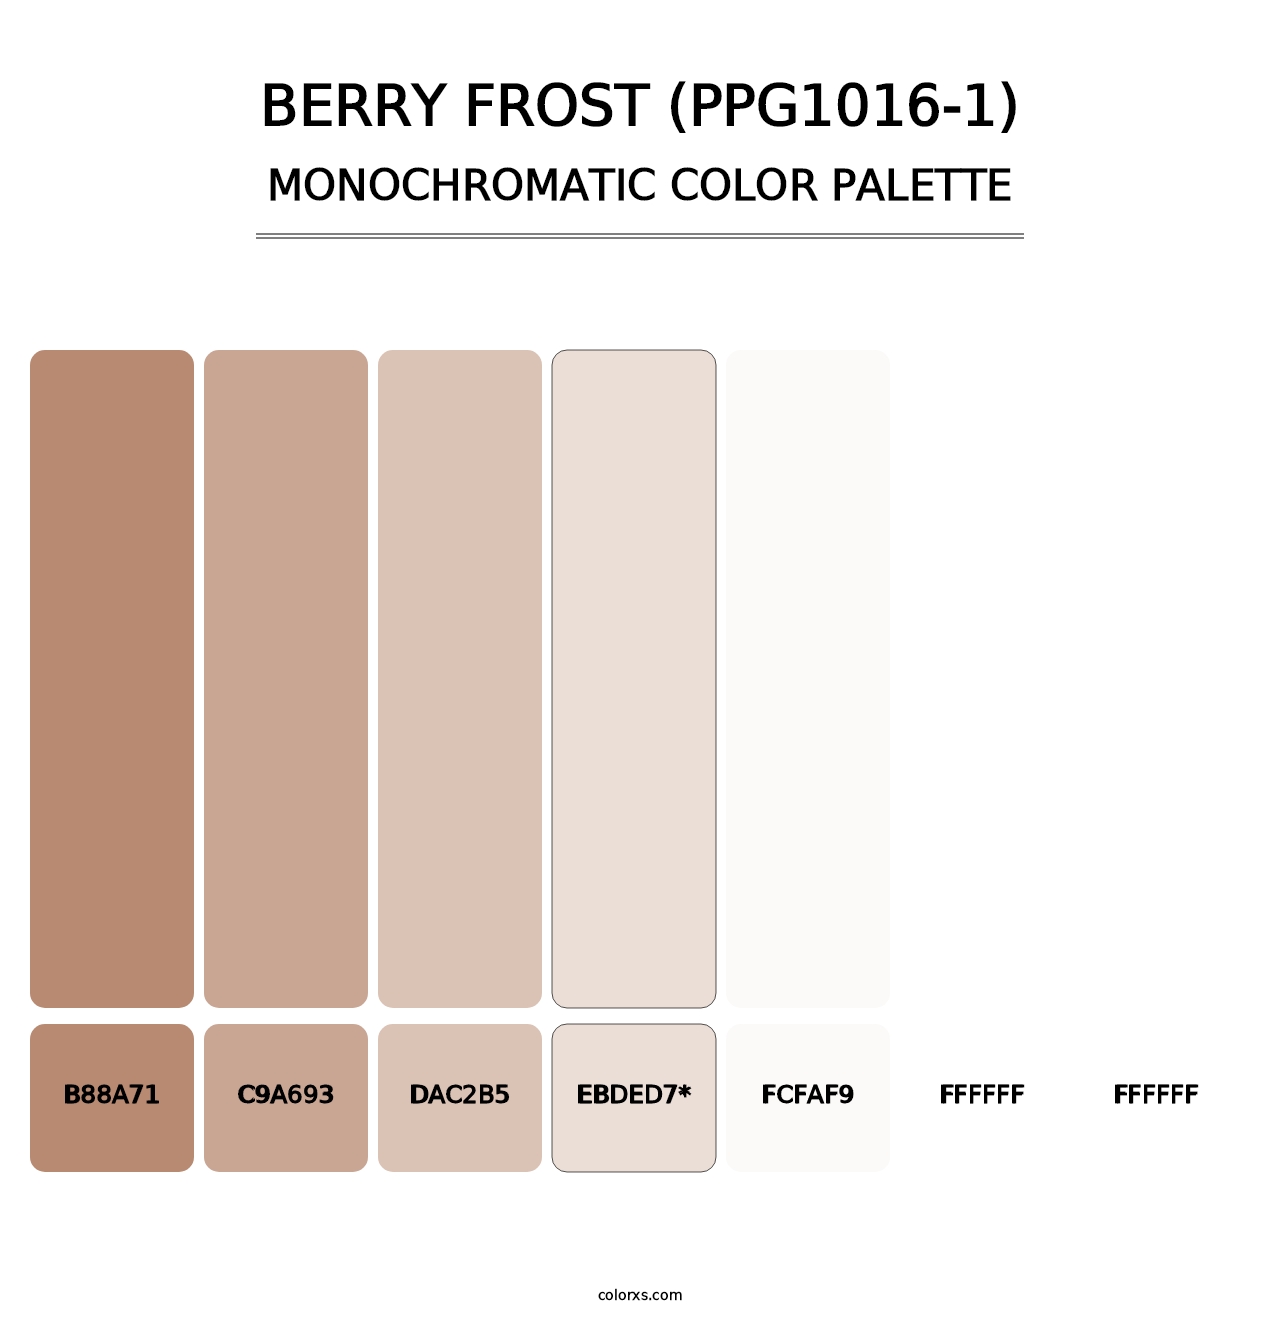 Berry Frost (PPG1016-1) - Monochromatic Color Palette